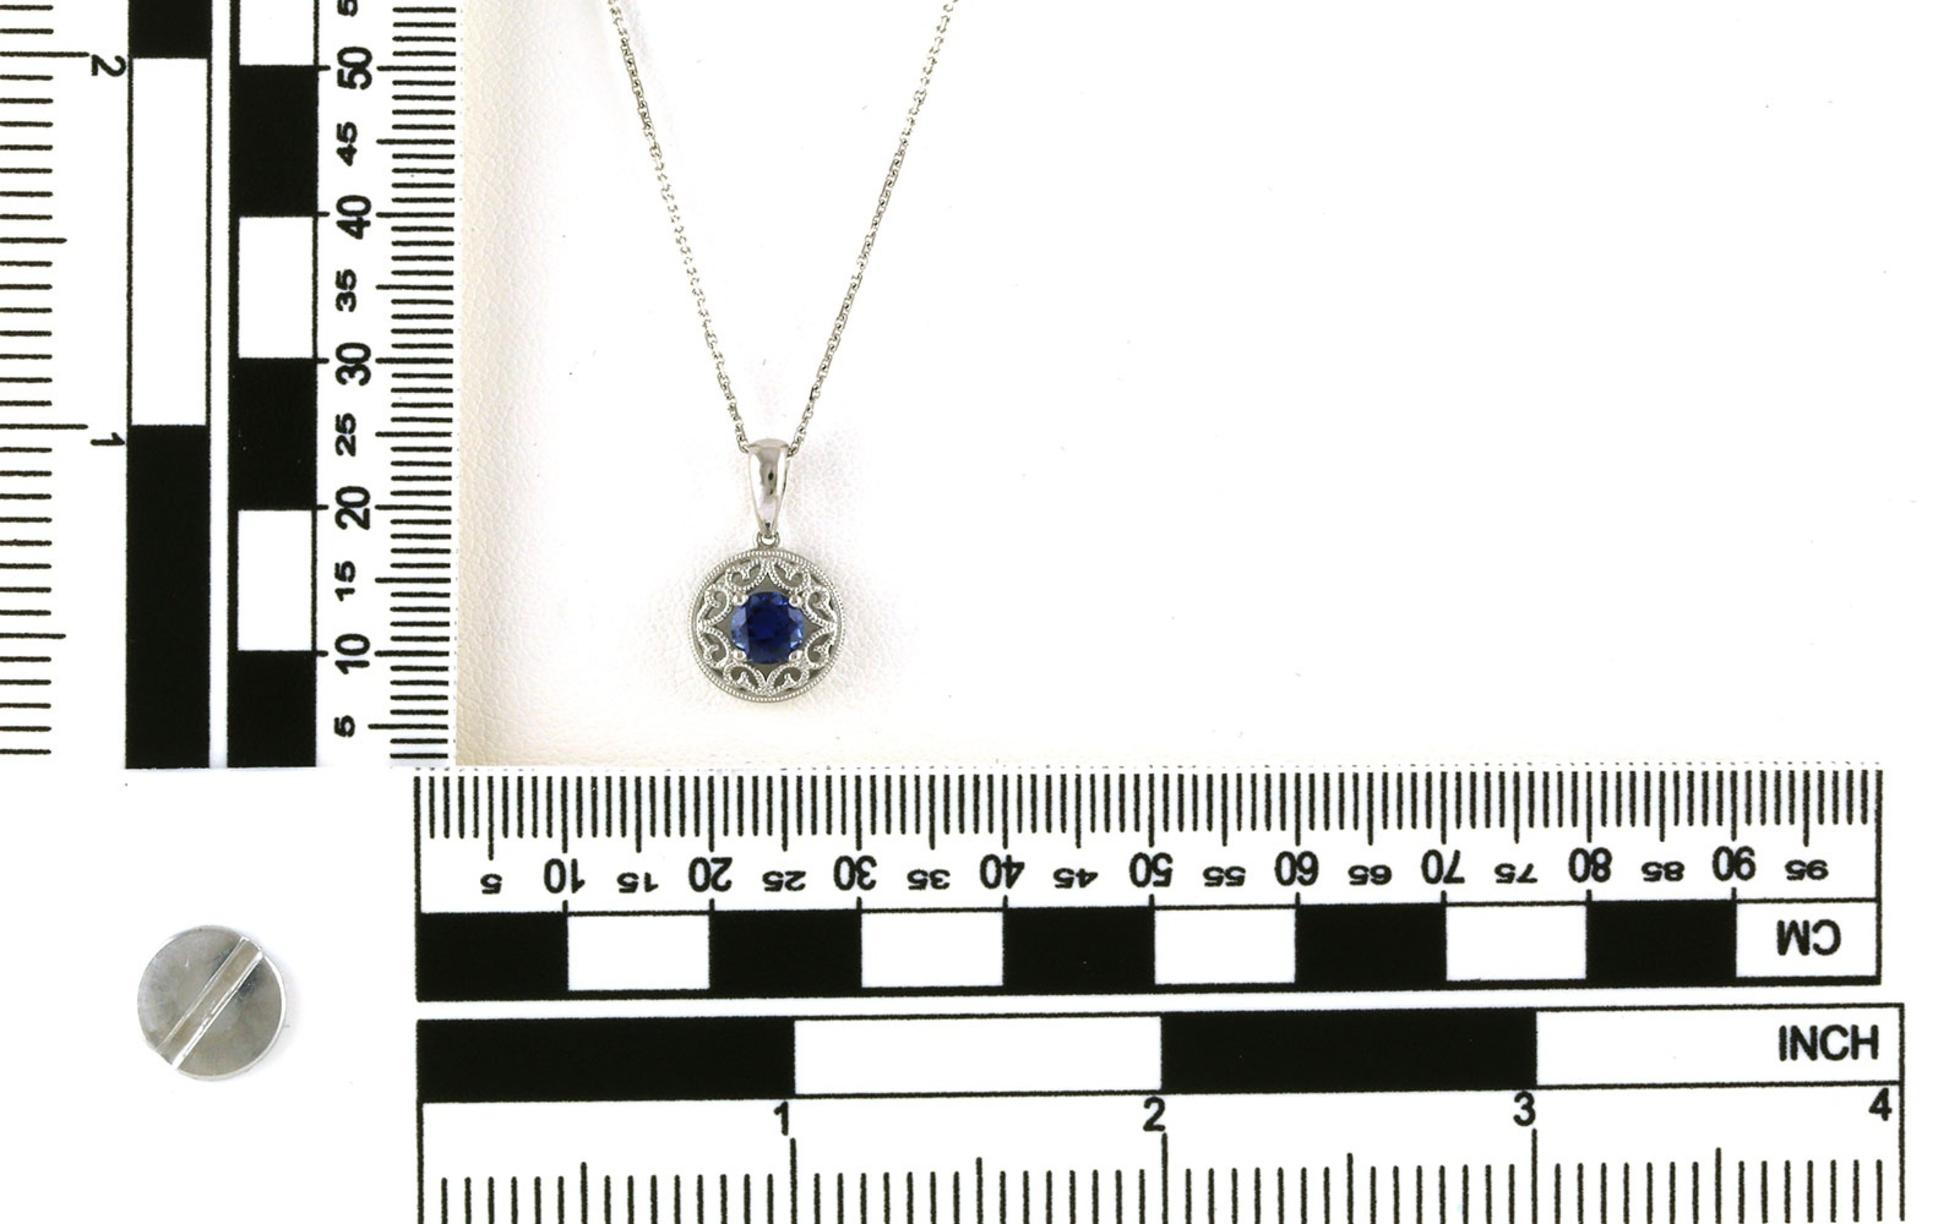 Filigree Halo Montana Yogo Sapphire Necklace with milgrain Detail in White Gold (0.56cts TWT) scale